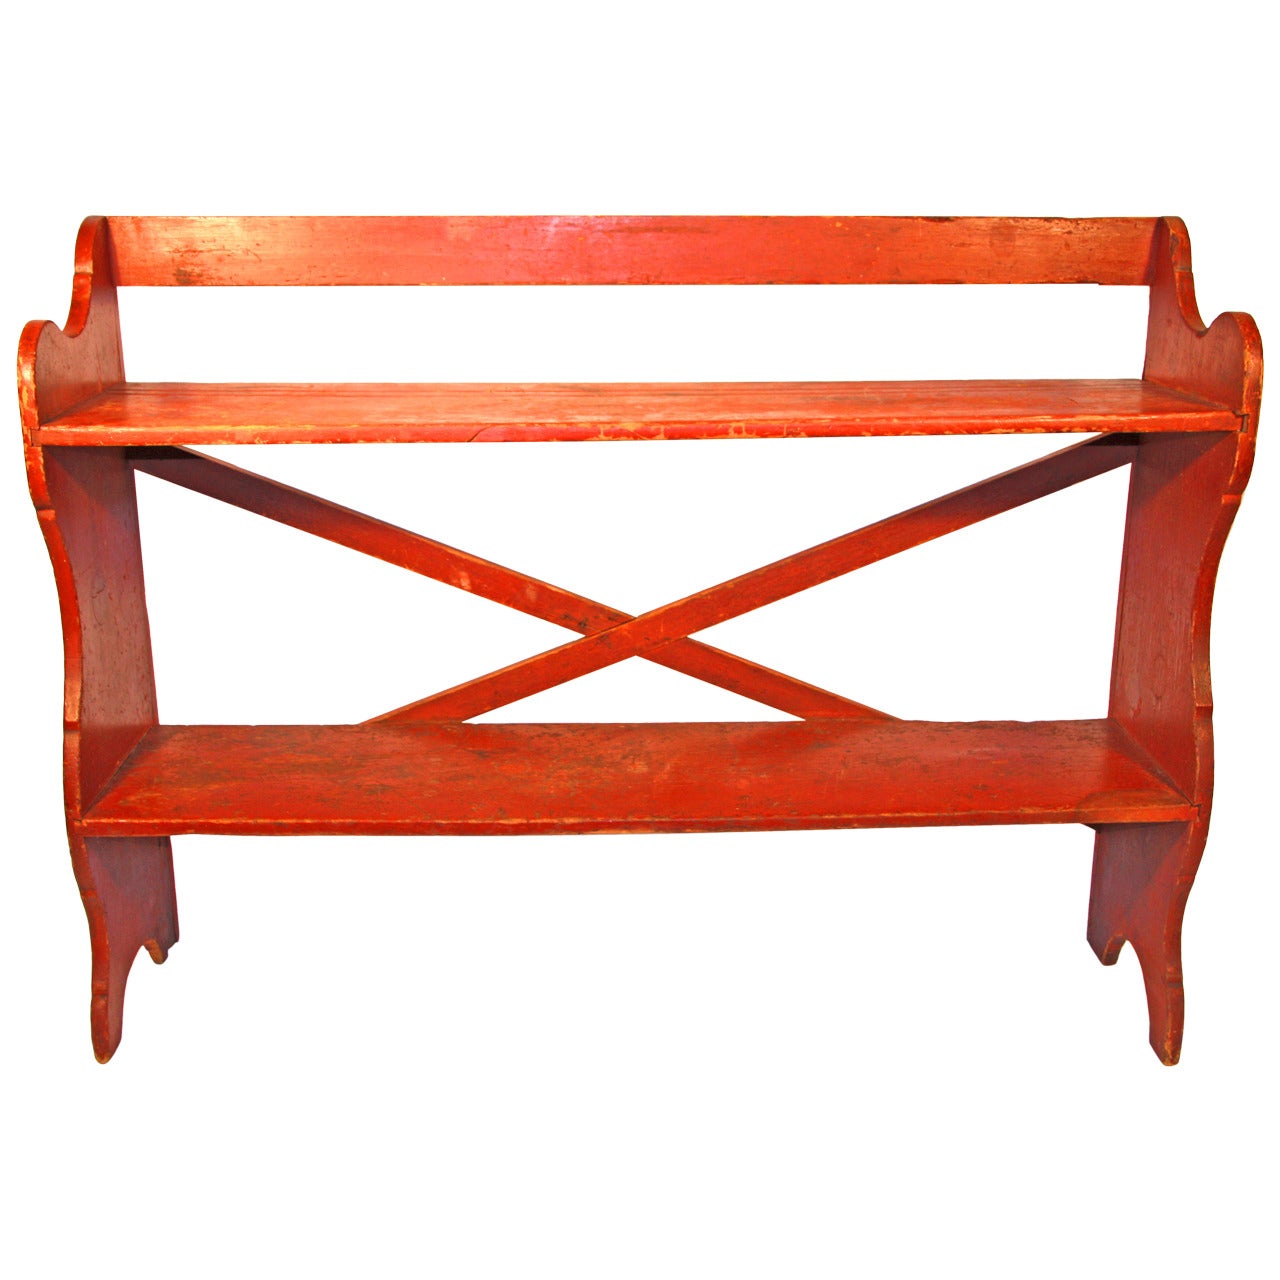 19th Century Pennsylvania Painted Pine Bucket Bench in Old Red Surface For Sale